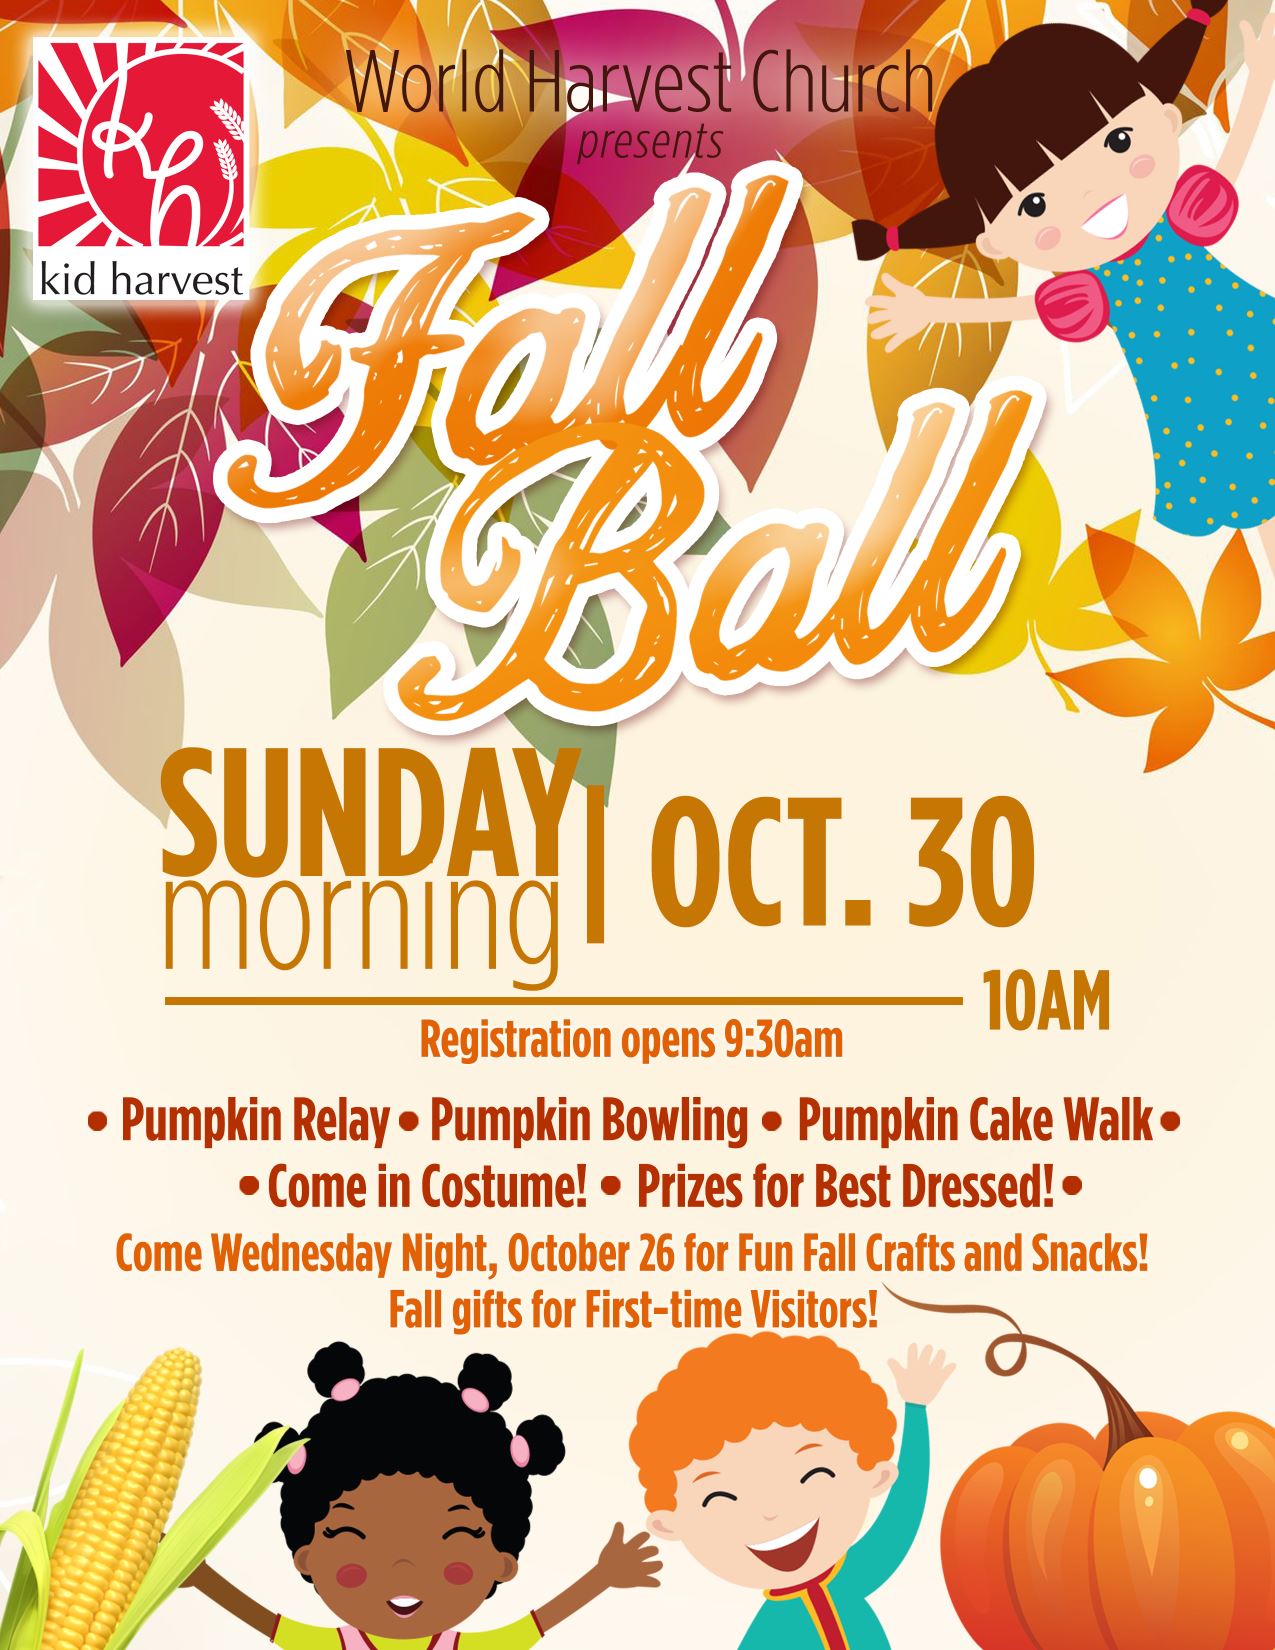 kid harvest | World Harvest Church presents Fall Ball | Sunday morning, October 30th, 10am – Registration opens 9:30am | Pumpkin Relay – Pumpkin Bowling – Pumpkin Cake Walk – Come in Costume! – Prizes for Best Dressed! Come Wednesday Night, October 26 for Fun Fall Crafts and Snacks! Fall gifts for First-Time Visitors!